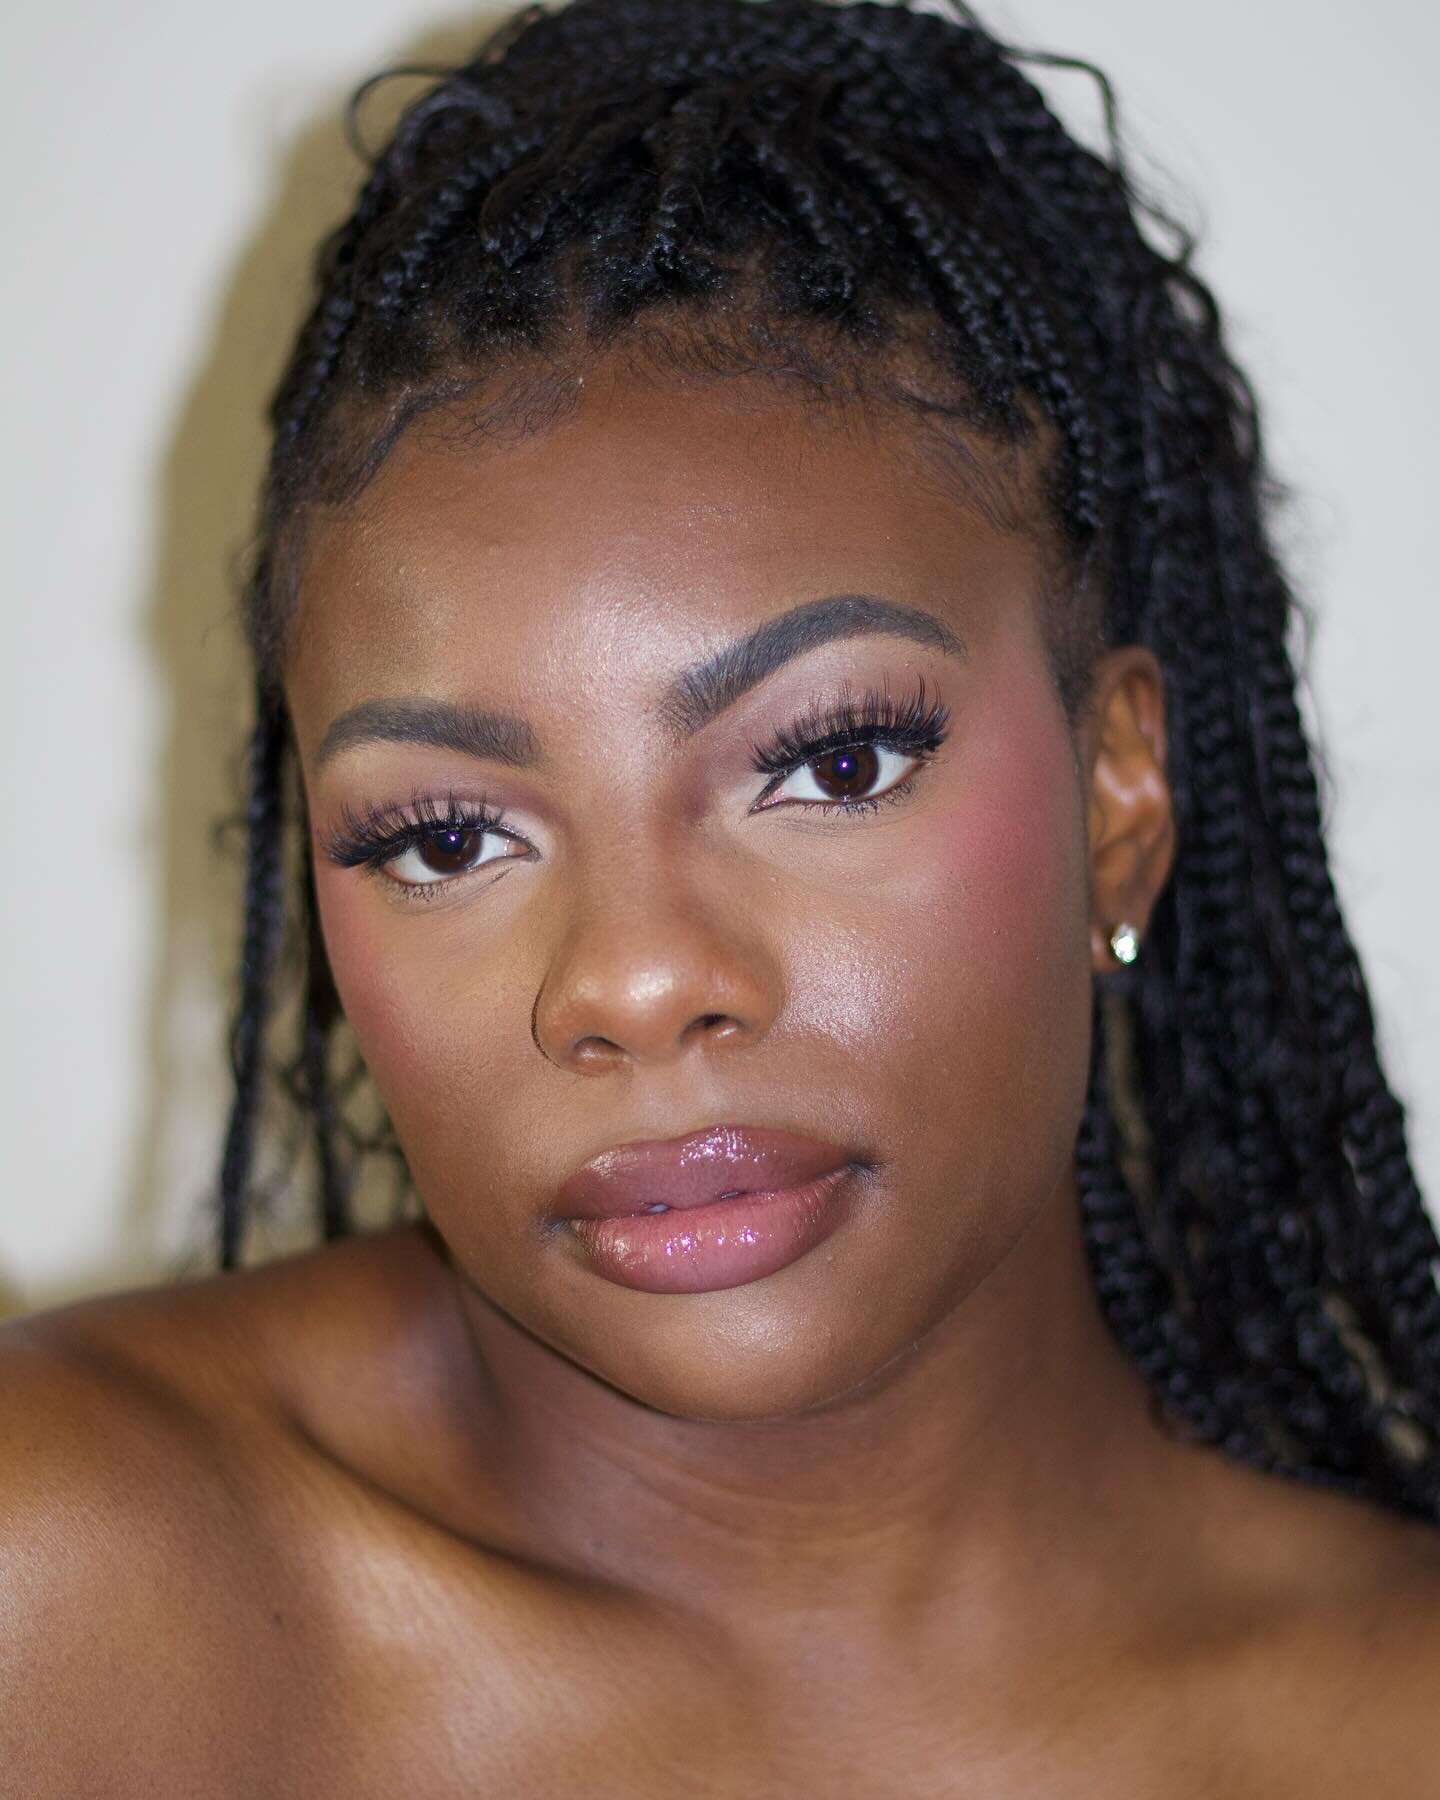 Yall I&rsquo;ve been obsessed with the pink blush trend and I had to try it. what do you think? 🫣💗 

I have gotten so much better at doing my makeup. It&rsquo;s a fun hobby for me 🥰
.
.
.
.
.
.
#darkskinmakeup #pinkblush #pinkmakeuplook Amaya colo